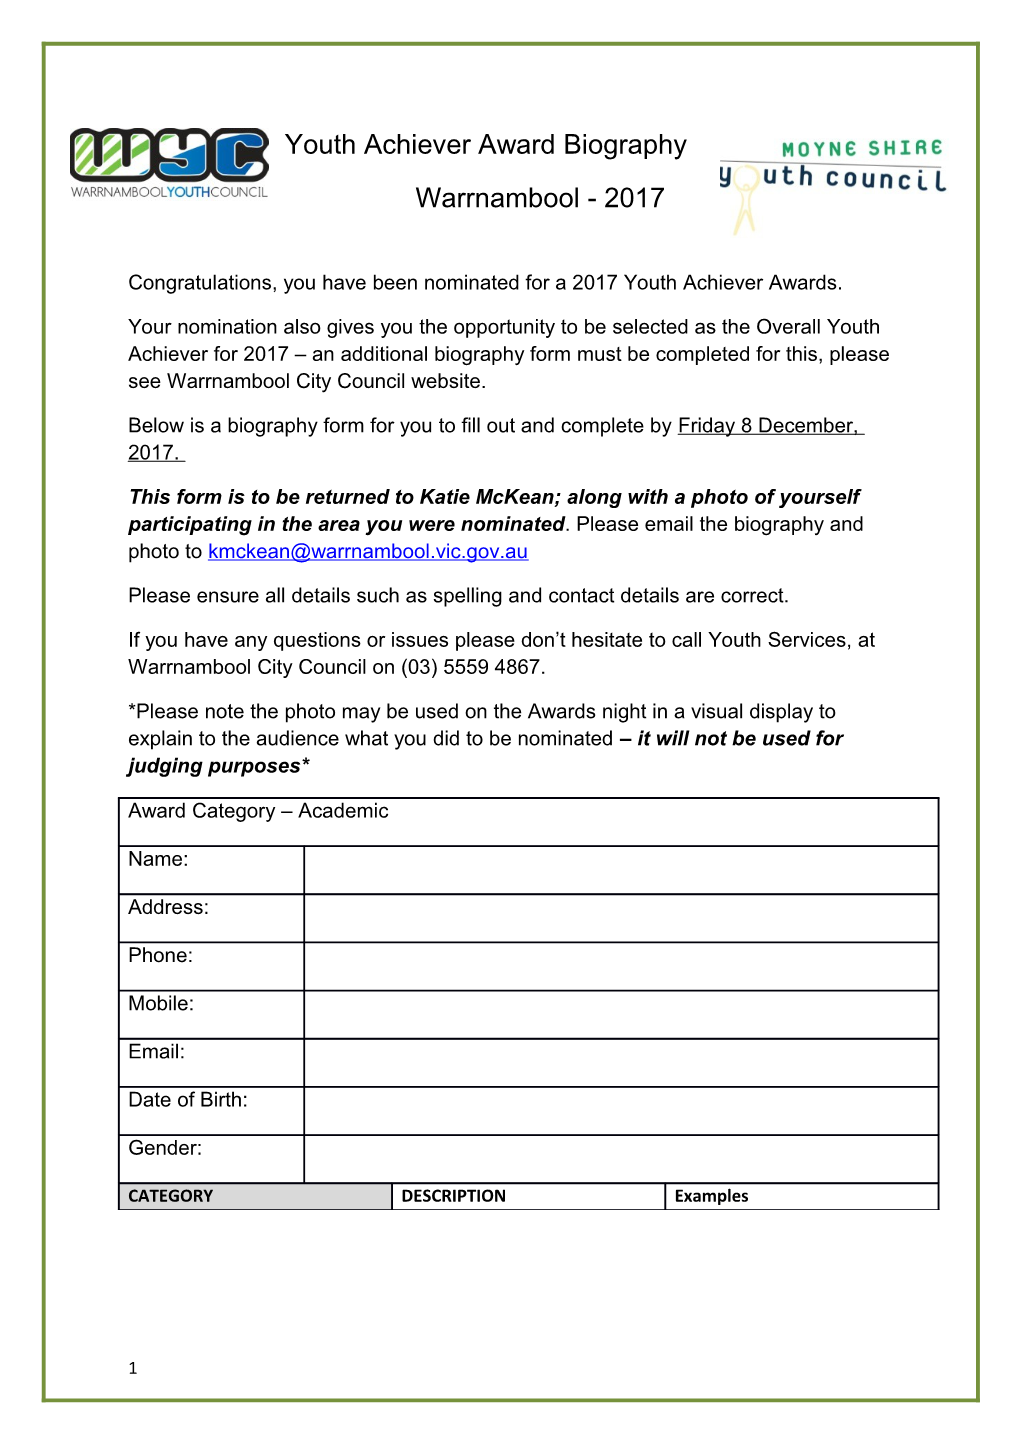 Congratulations, You Have Been Nominated for a 2017 Youth Achiever Awards